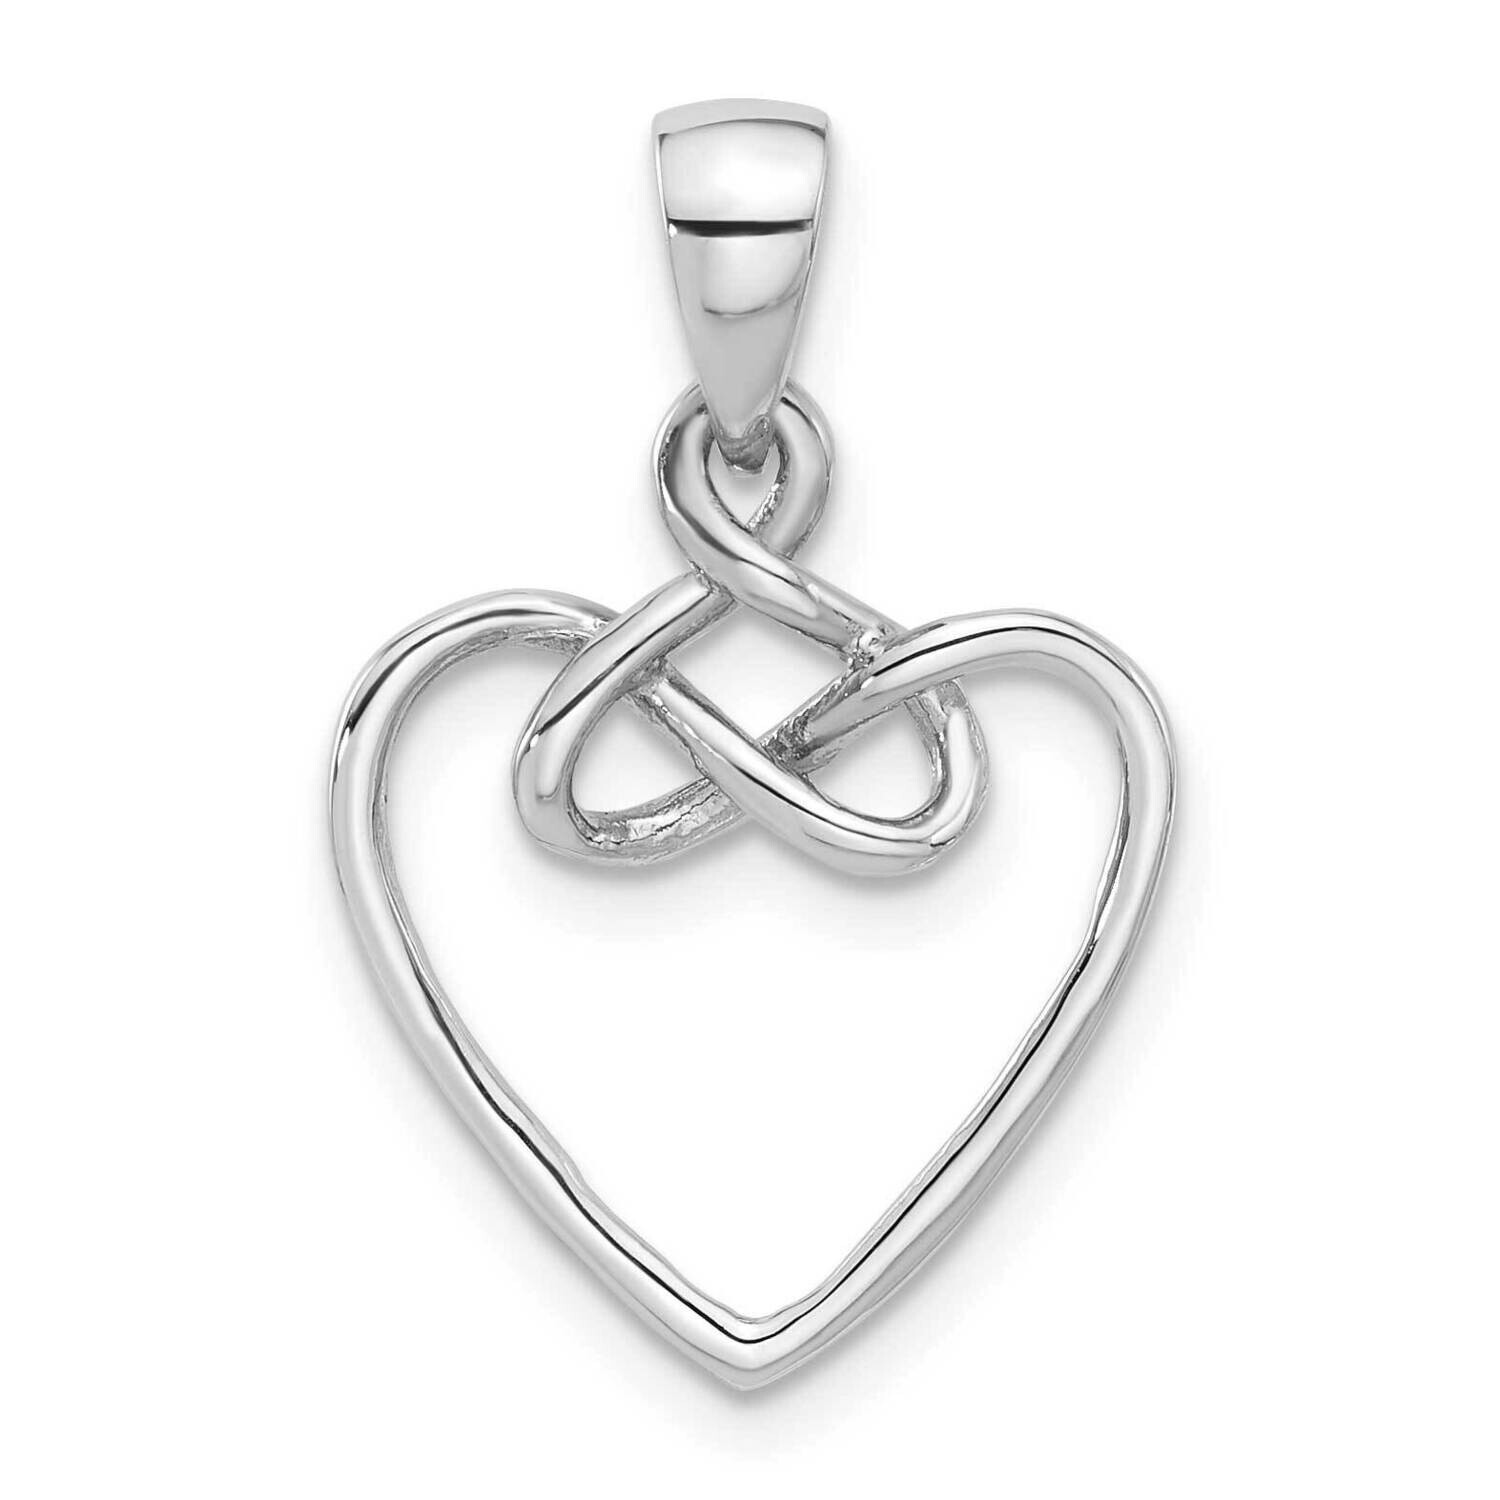 Polished Fancy Open Heart Pendant Sterling Silver Rhodium-Plated QC11353